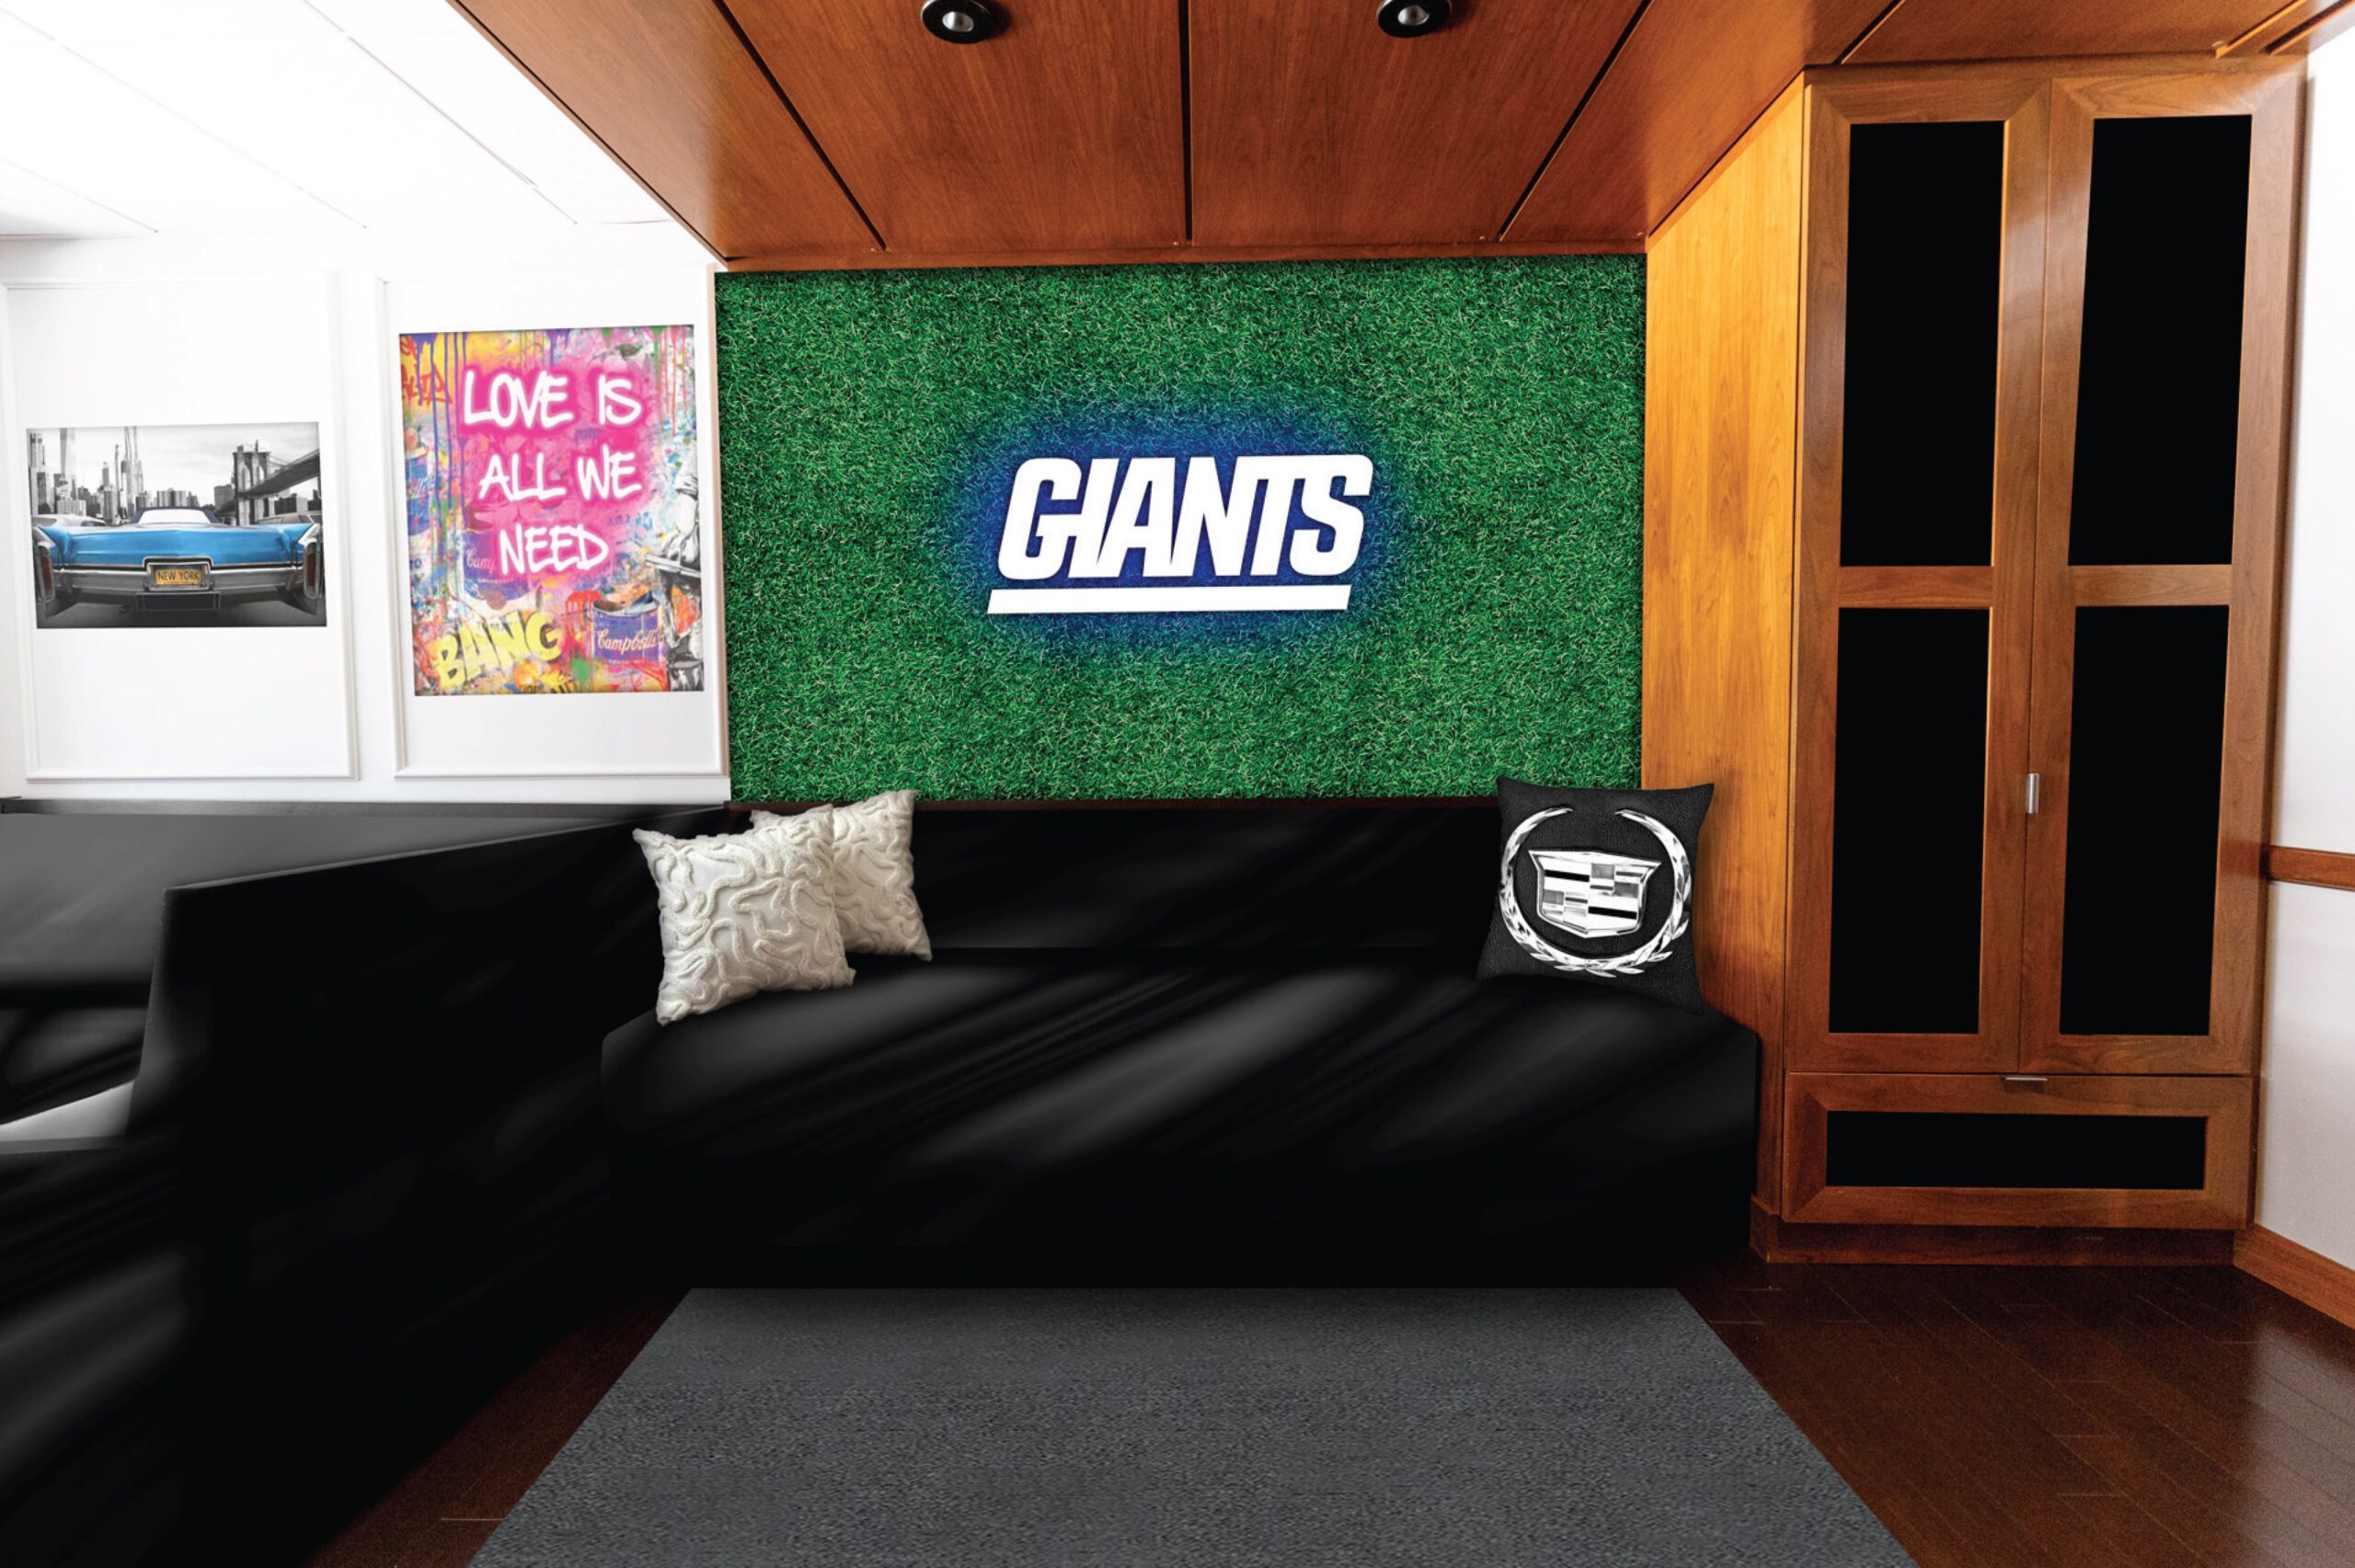 NY Giants Influencer Suite at MetLife Stadium